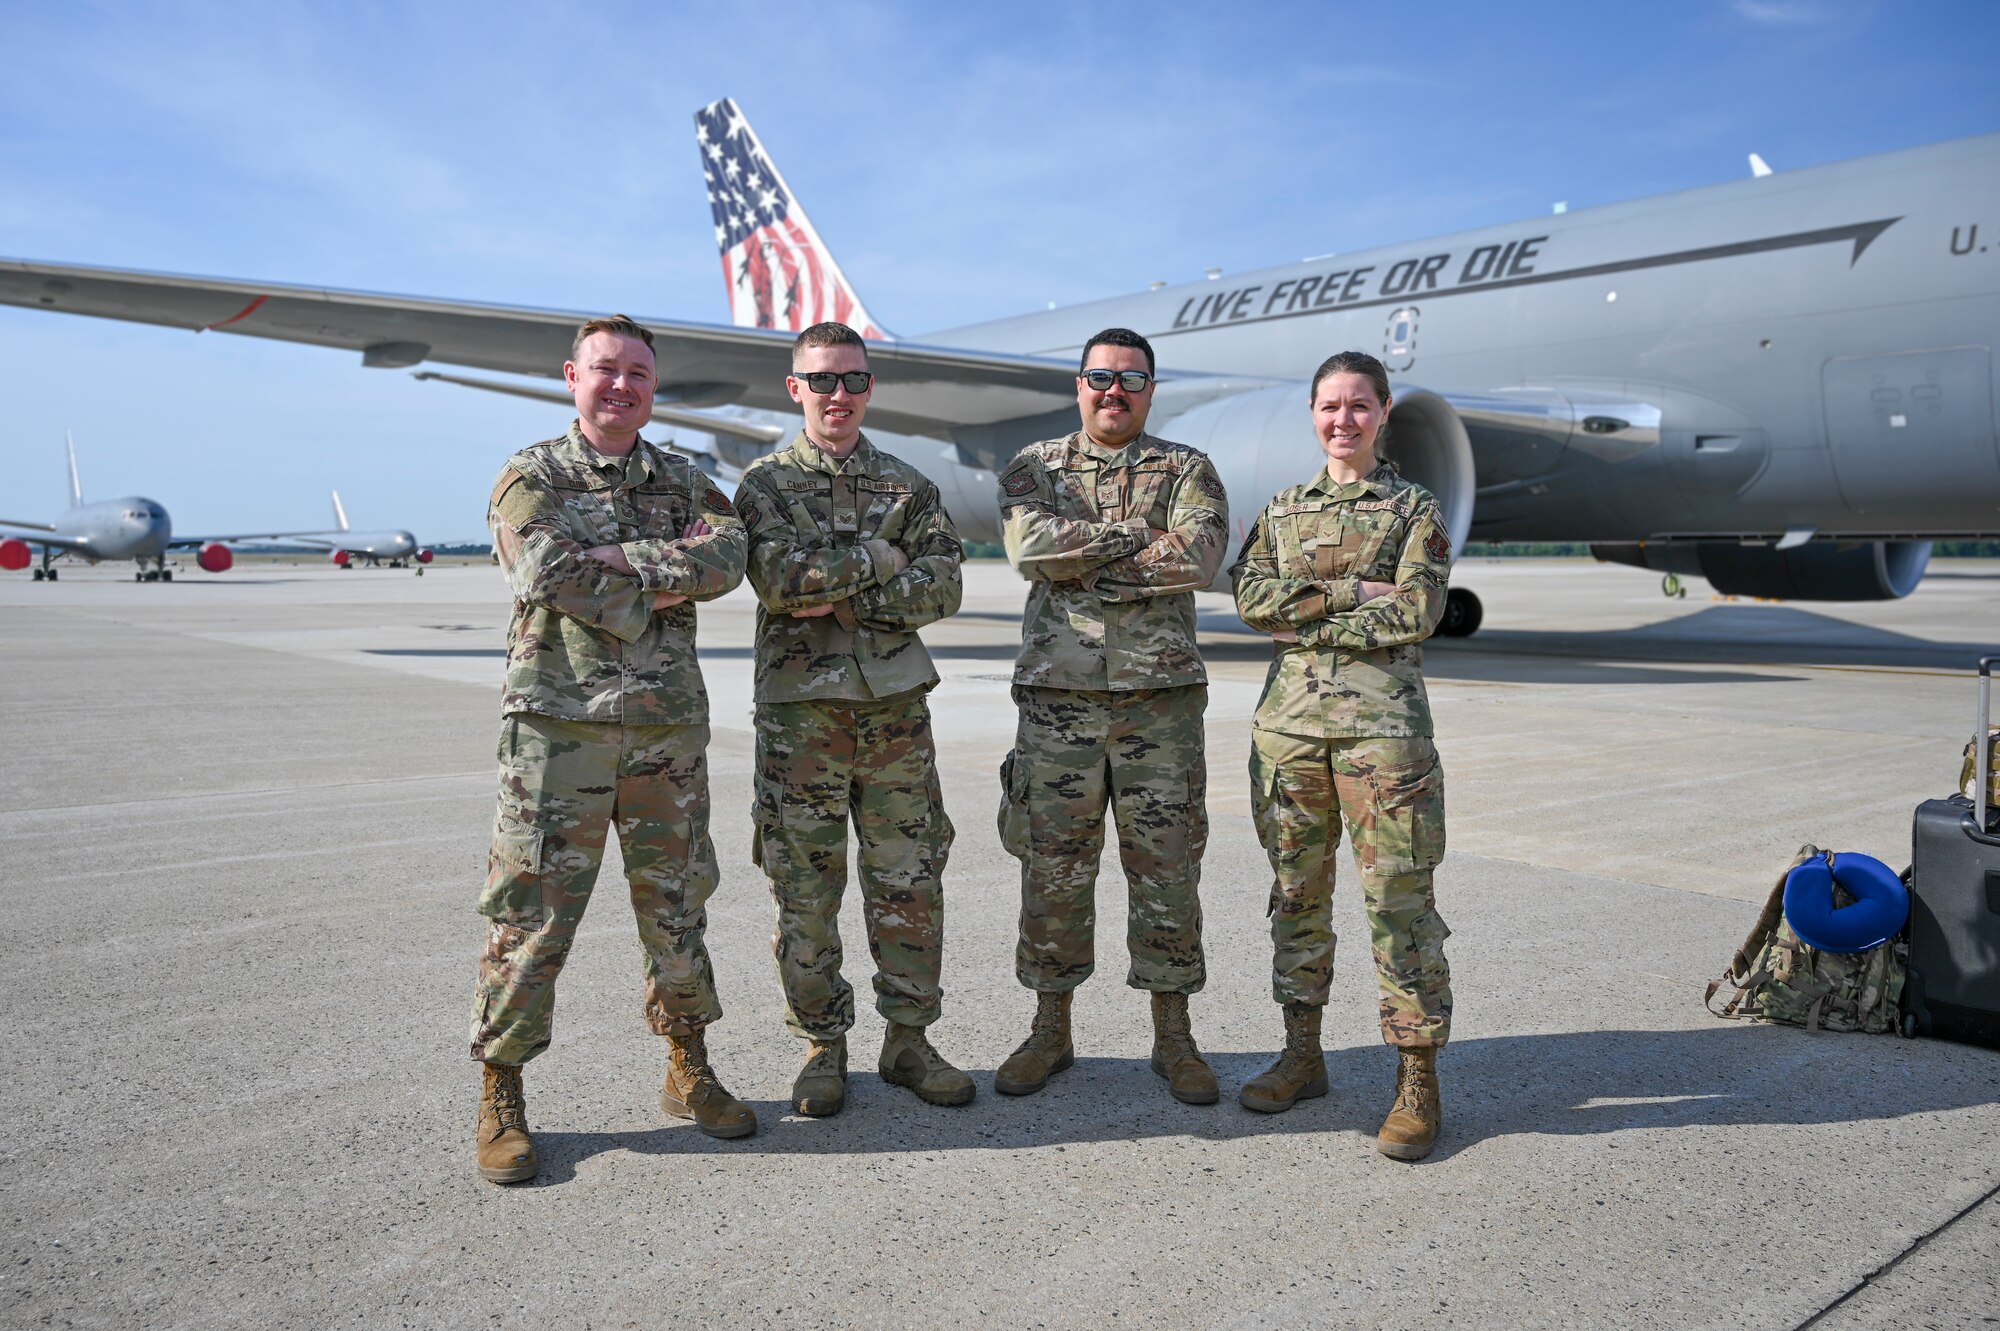  
Following a three-week stay in Alaska, the Spirit of Portsmouth, one of 12 KC-46A jets assigned to the 157th Air Refueling Wing, returned home with a patriotic new look, just in time for the Fourth of July.